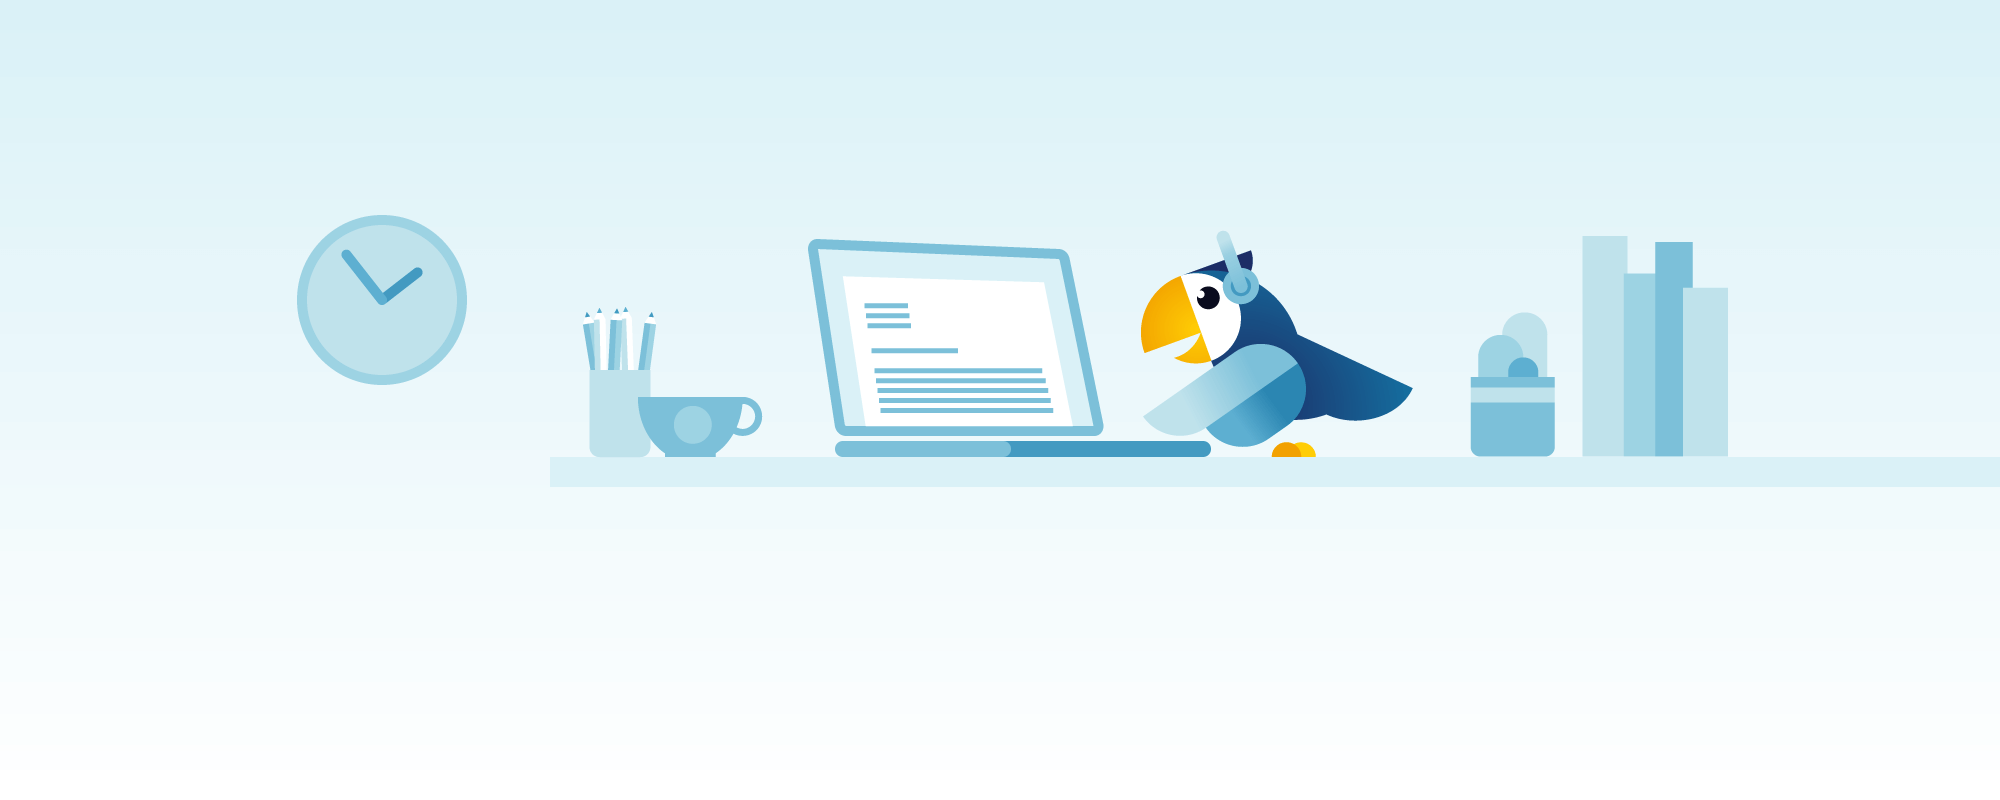 Graphic of a bird working on a computer | Featured Image for Philips SpeechLive 12-Month Subscription Product Page from Pacific Transcriptions.